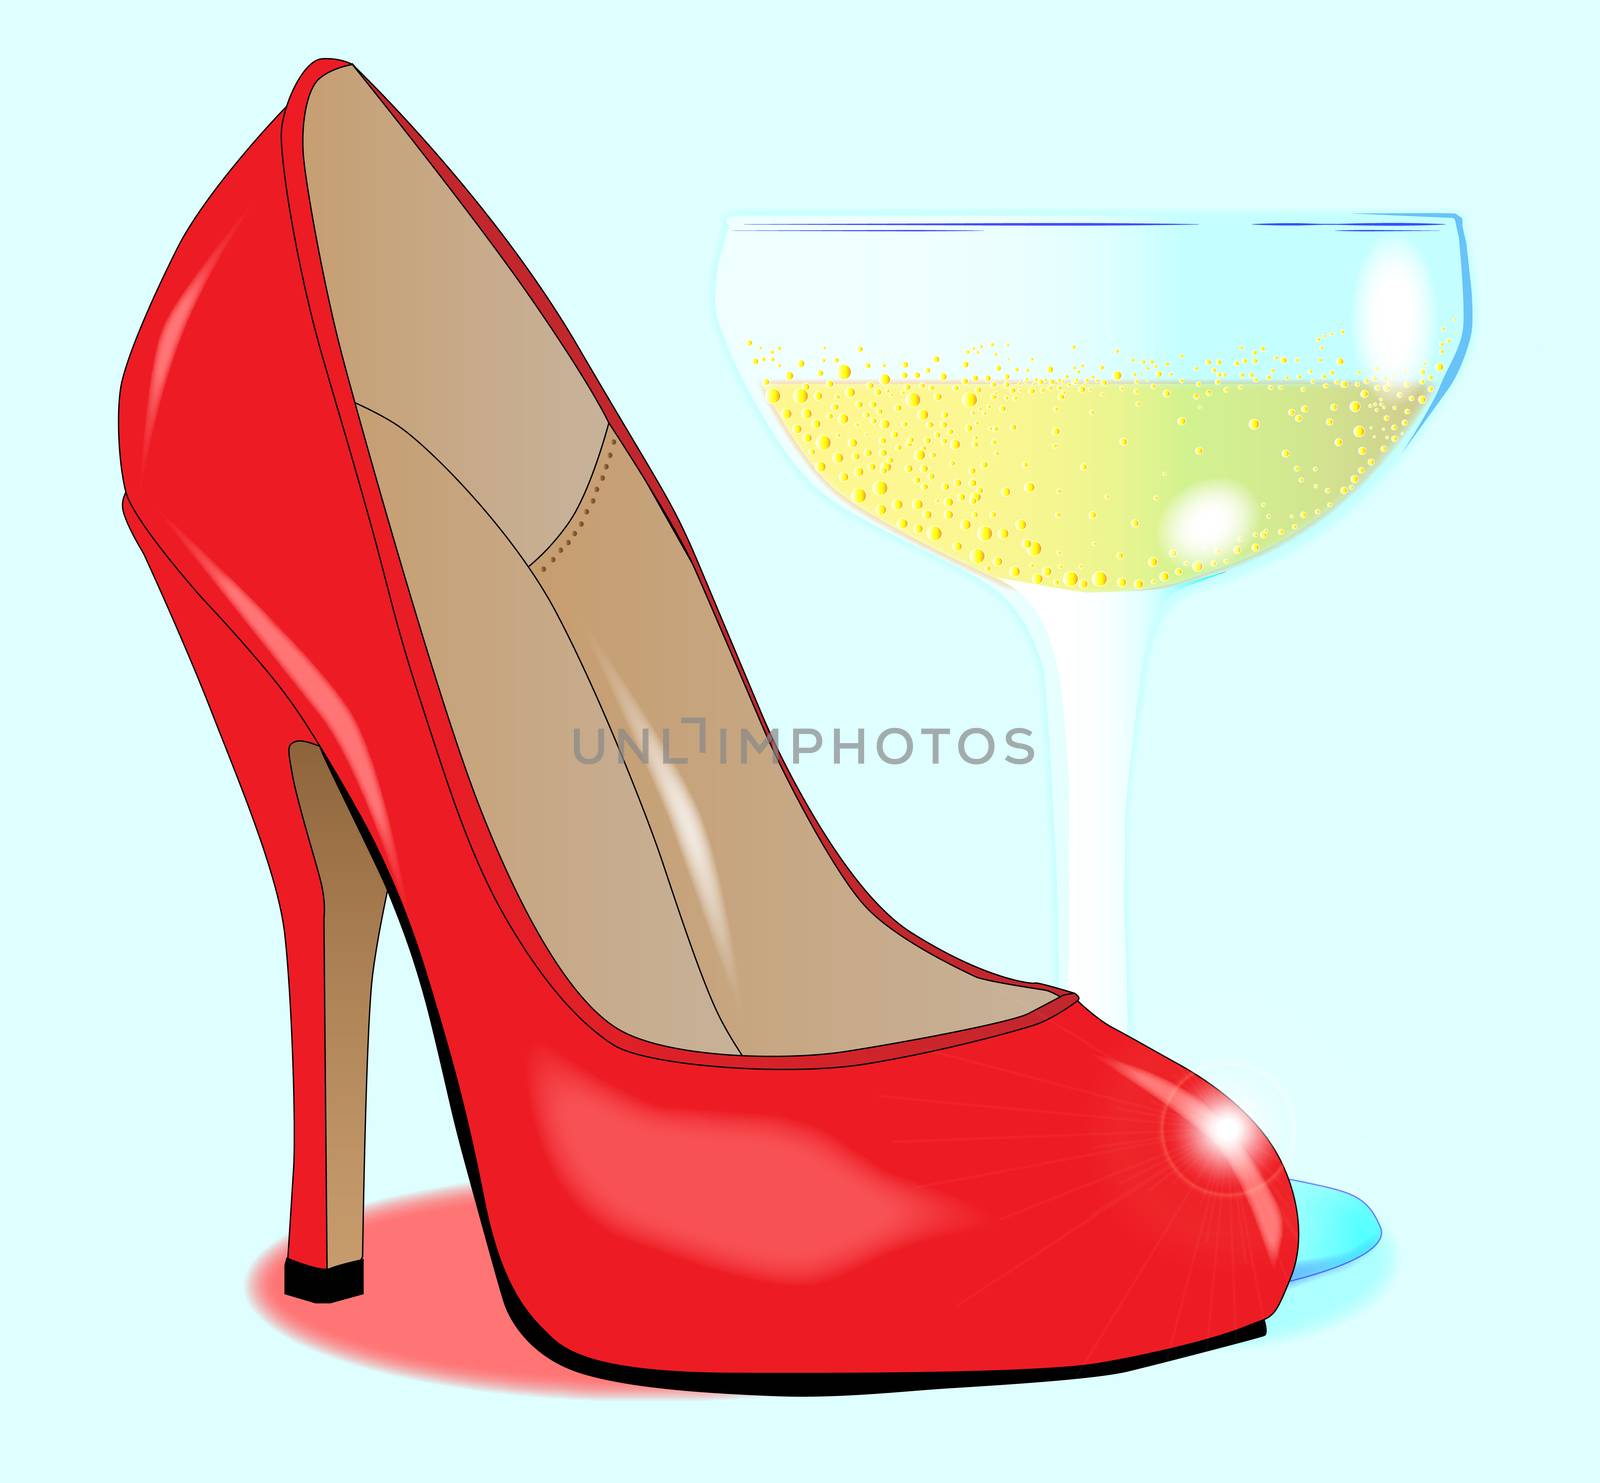 Champagne and Ladies Shoe by Bigalbaloo